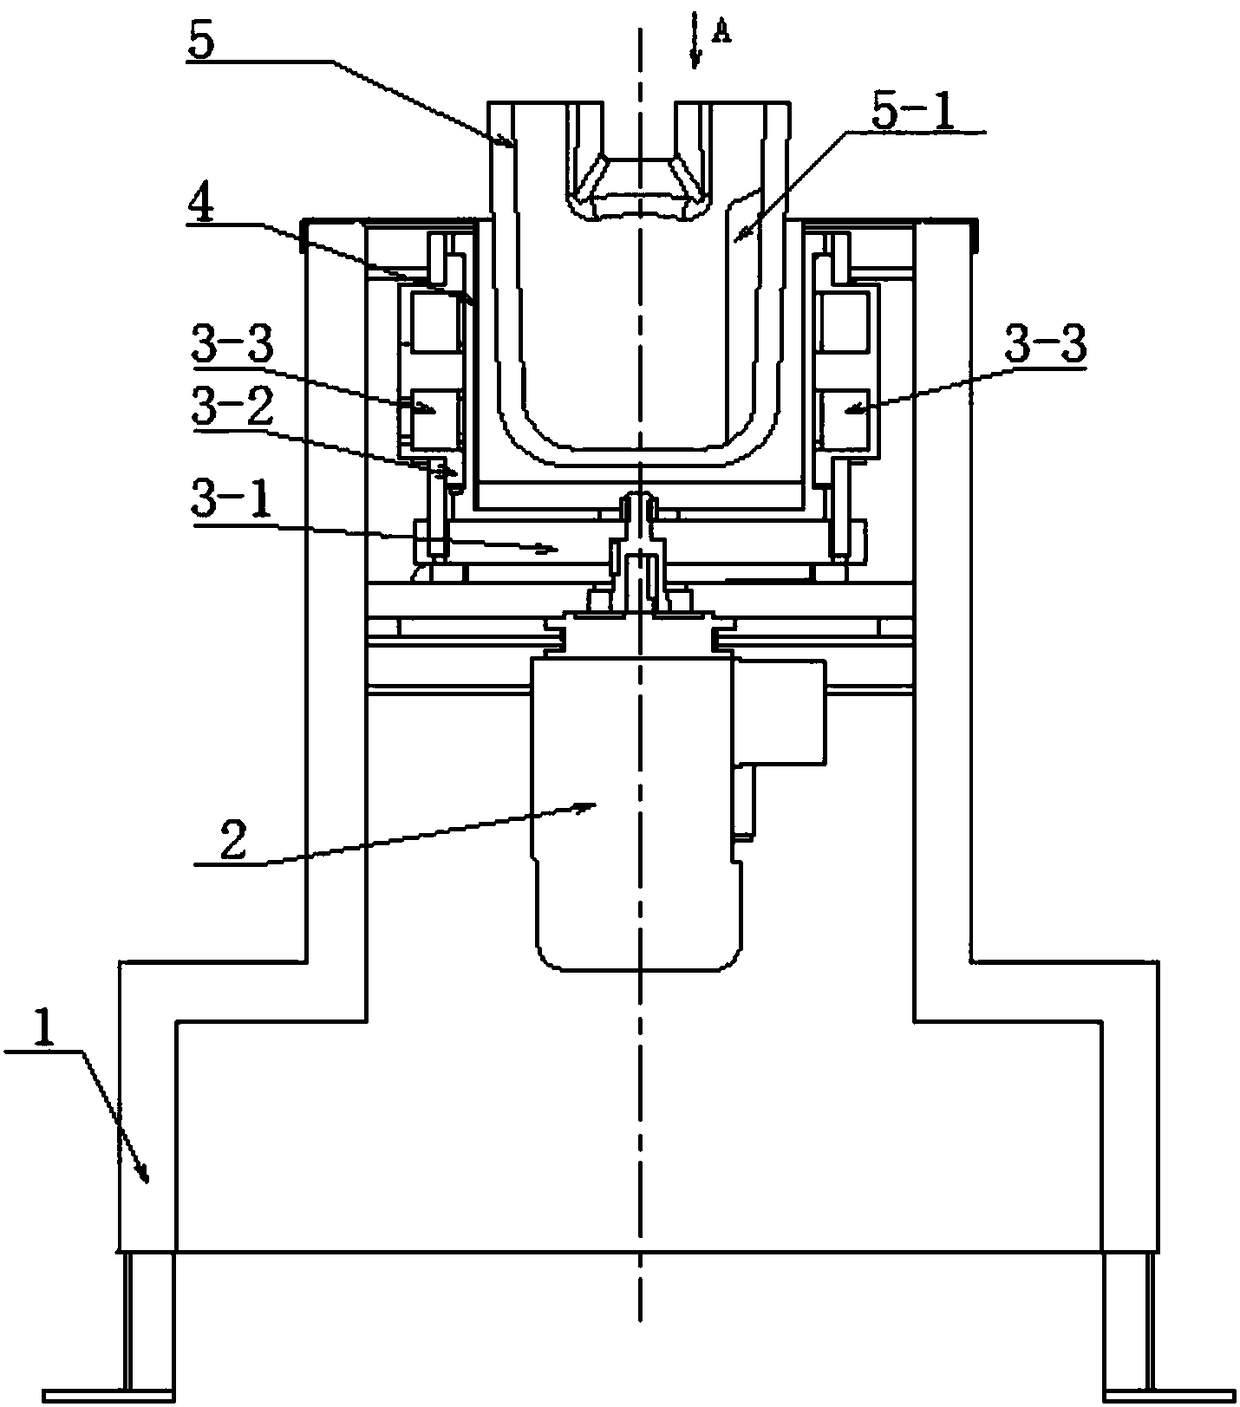 Permanent magnetic stirring device for semi-solid slurry preparation of metals